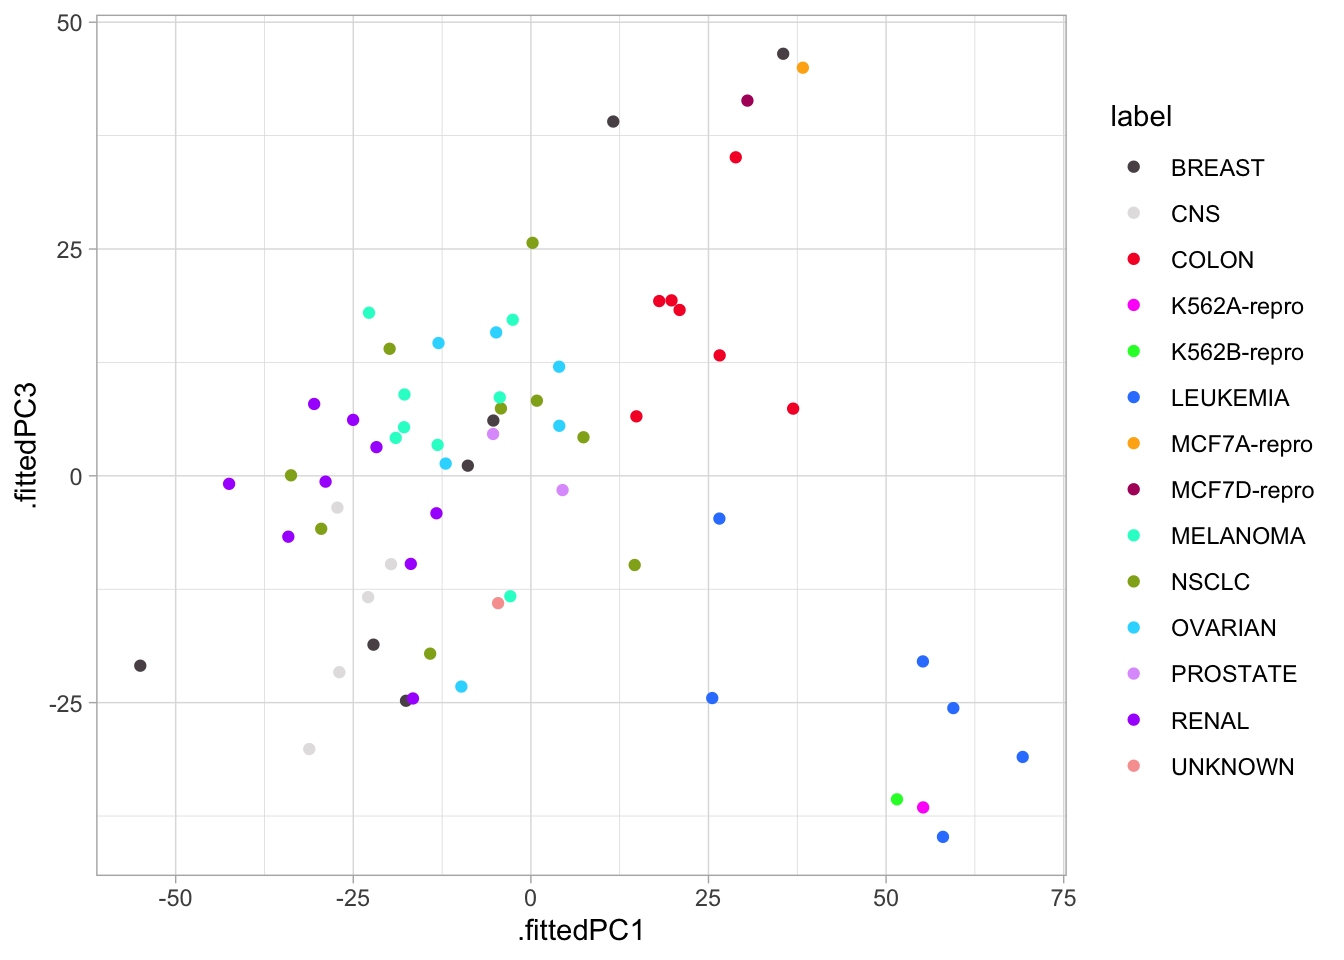 Scatter plot of nci60_pcs across the first and third principal components. Colors by label which has 14 unique values. Observations with same label appears fairly close together for most labels.